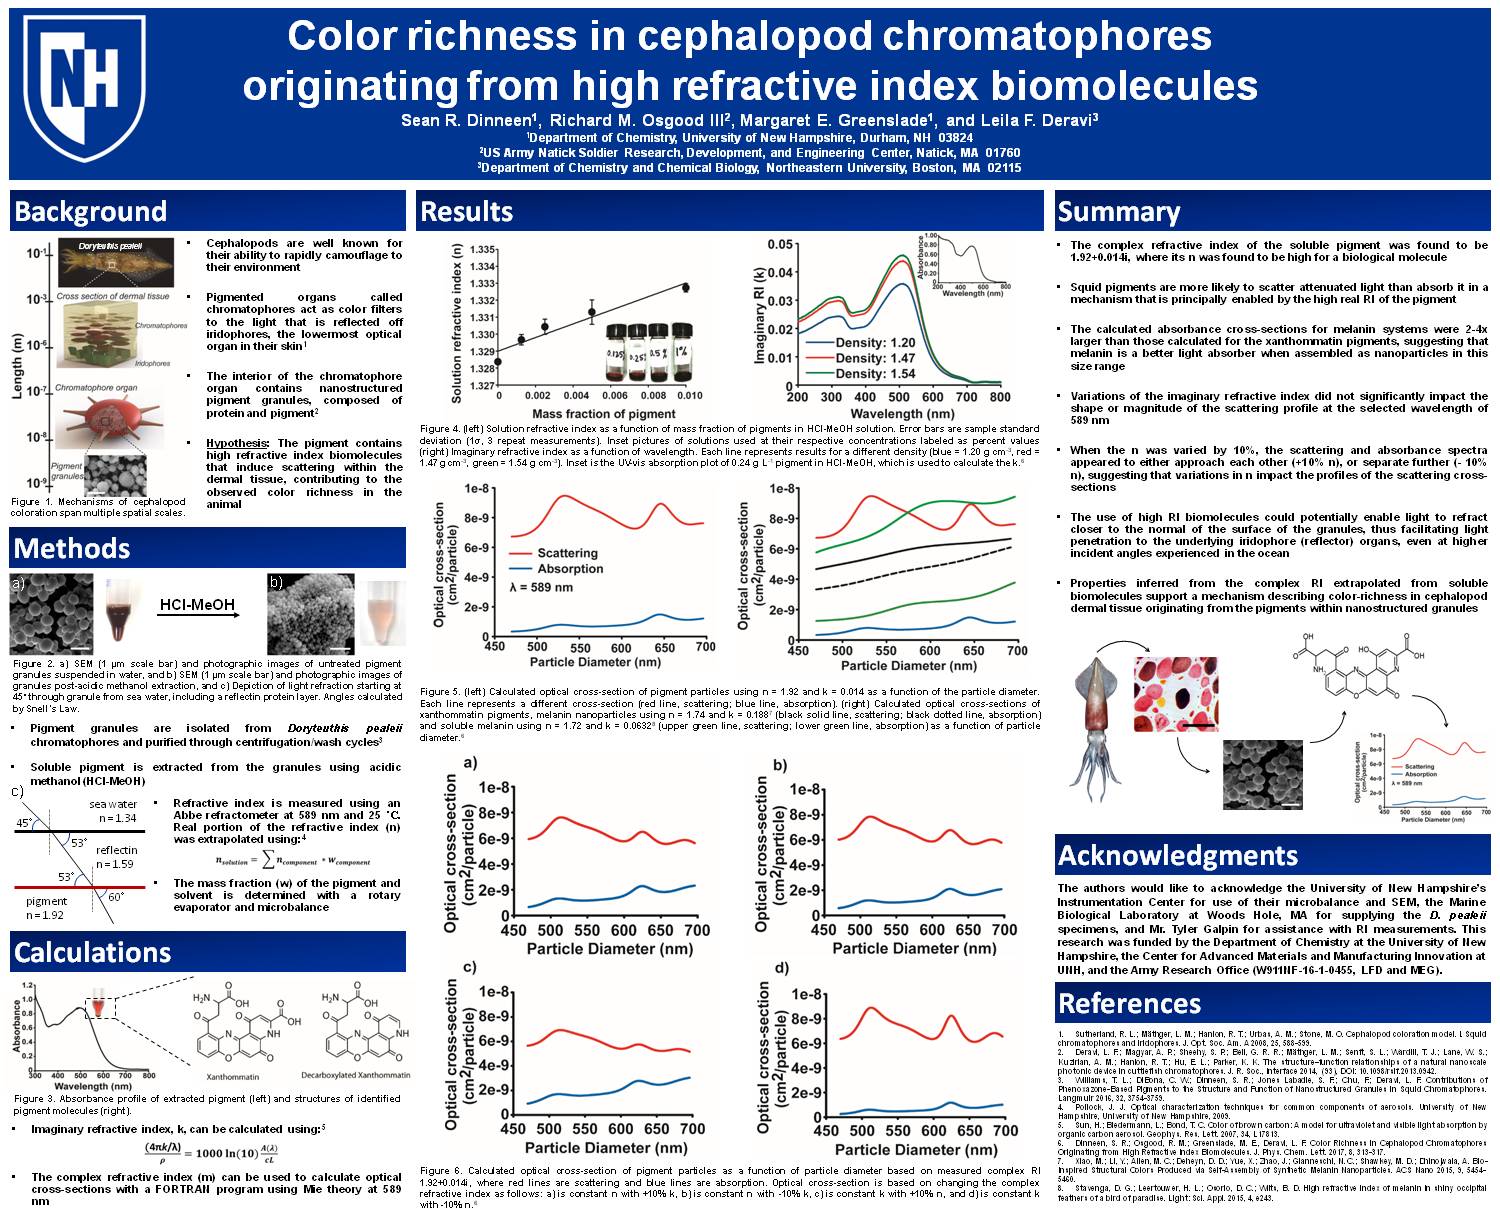 Color Richness In Cephalopod Chromatophores Originating From High Refractive Index Biomolecules by srd2009